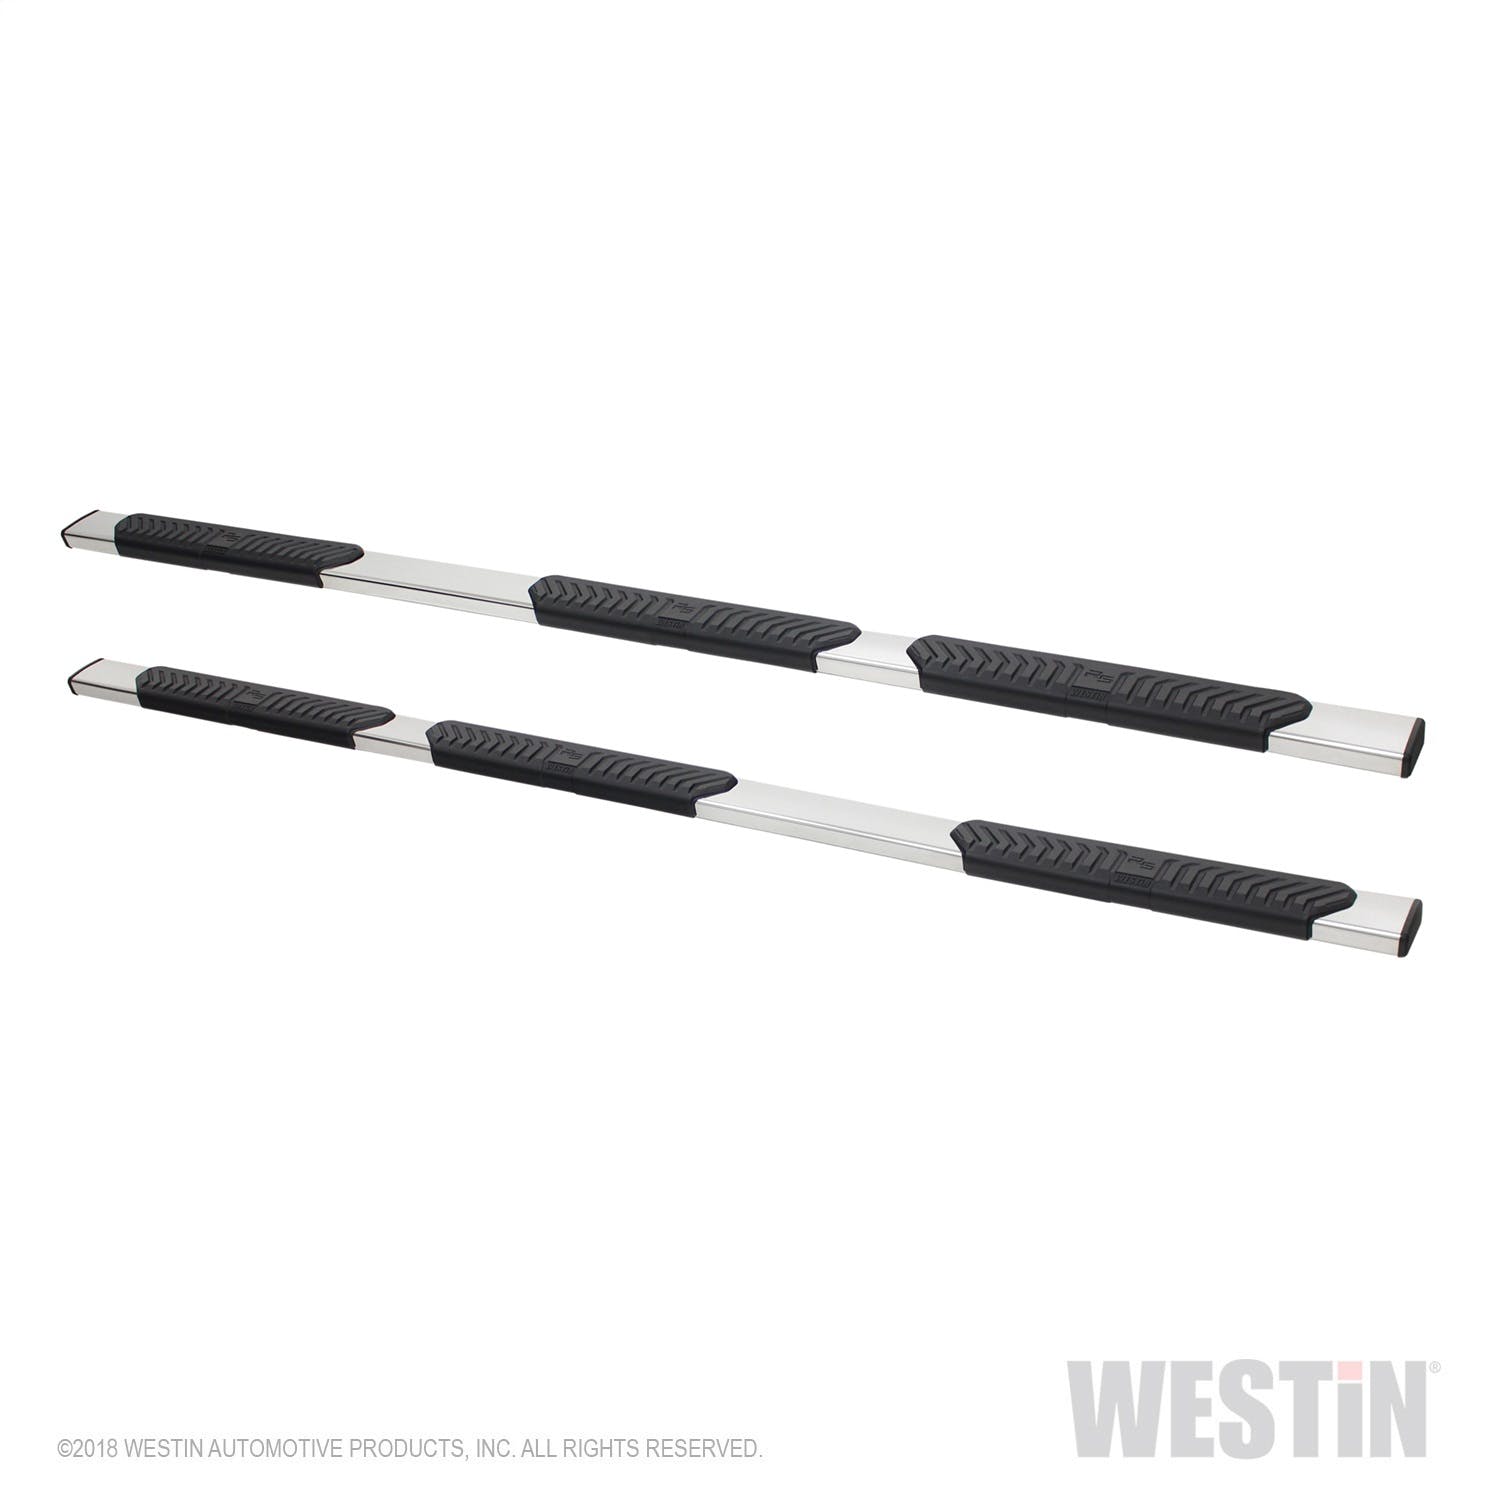 Westin Automotive 28-534580 R5 M-Series Wheel-to-Wheel Nerf Step Bars Polished Stainless